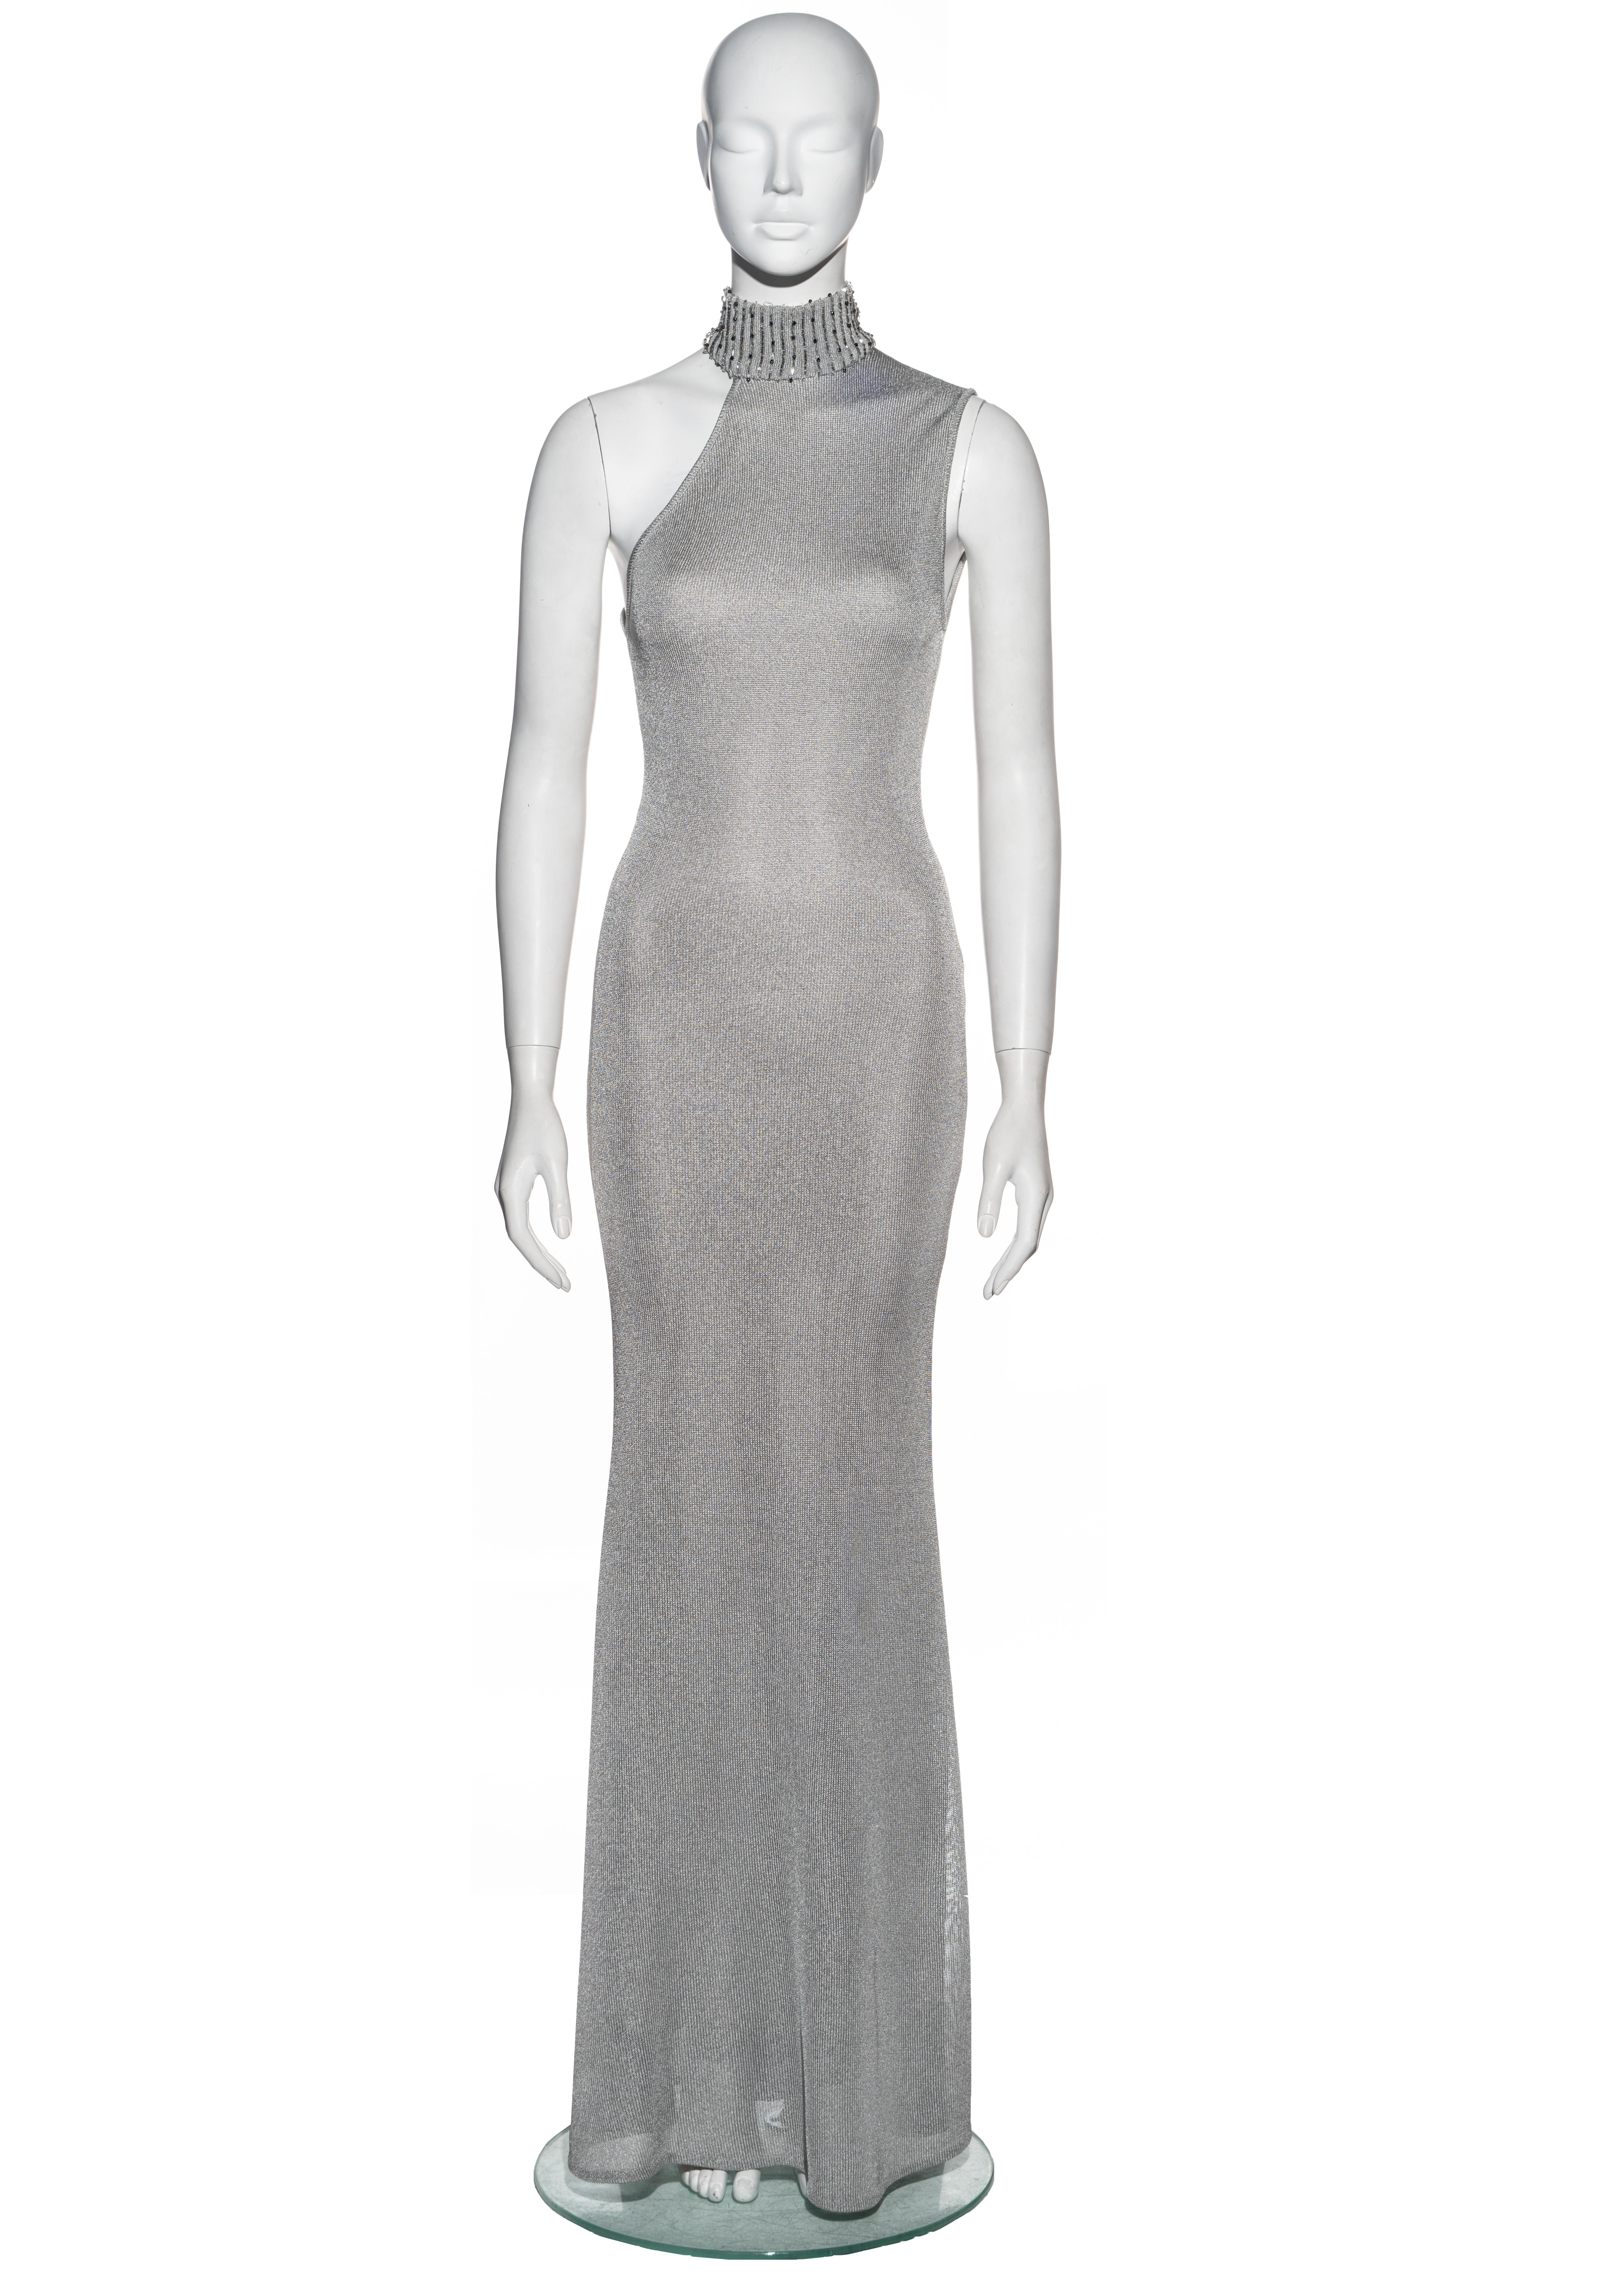 ▪ Gianni Versace silver knitted rayon evening dress
▪ Sold by One of a Kind Archive
▪ Fall-Winter 1996
▪ Ribbed turtleneck with beaded vertical striped design
▪ Asymmetric neckline
▪ Floor-length skirt 
▪ Fully lined 
▪ 71% Rayon, 15% Acetate, 14%